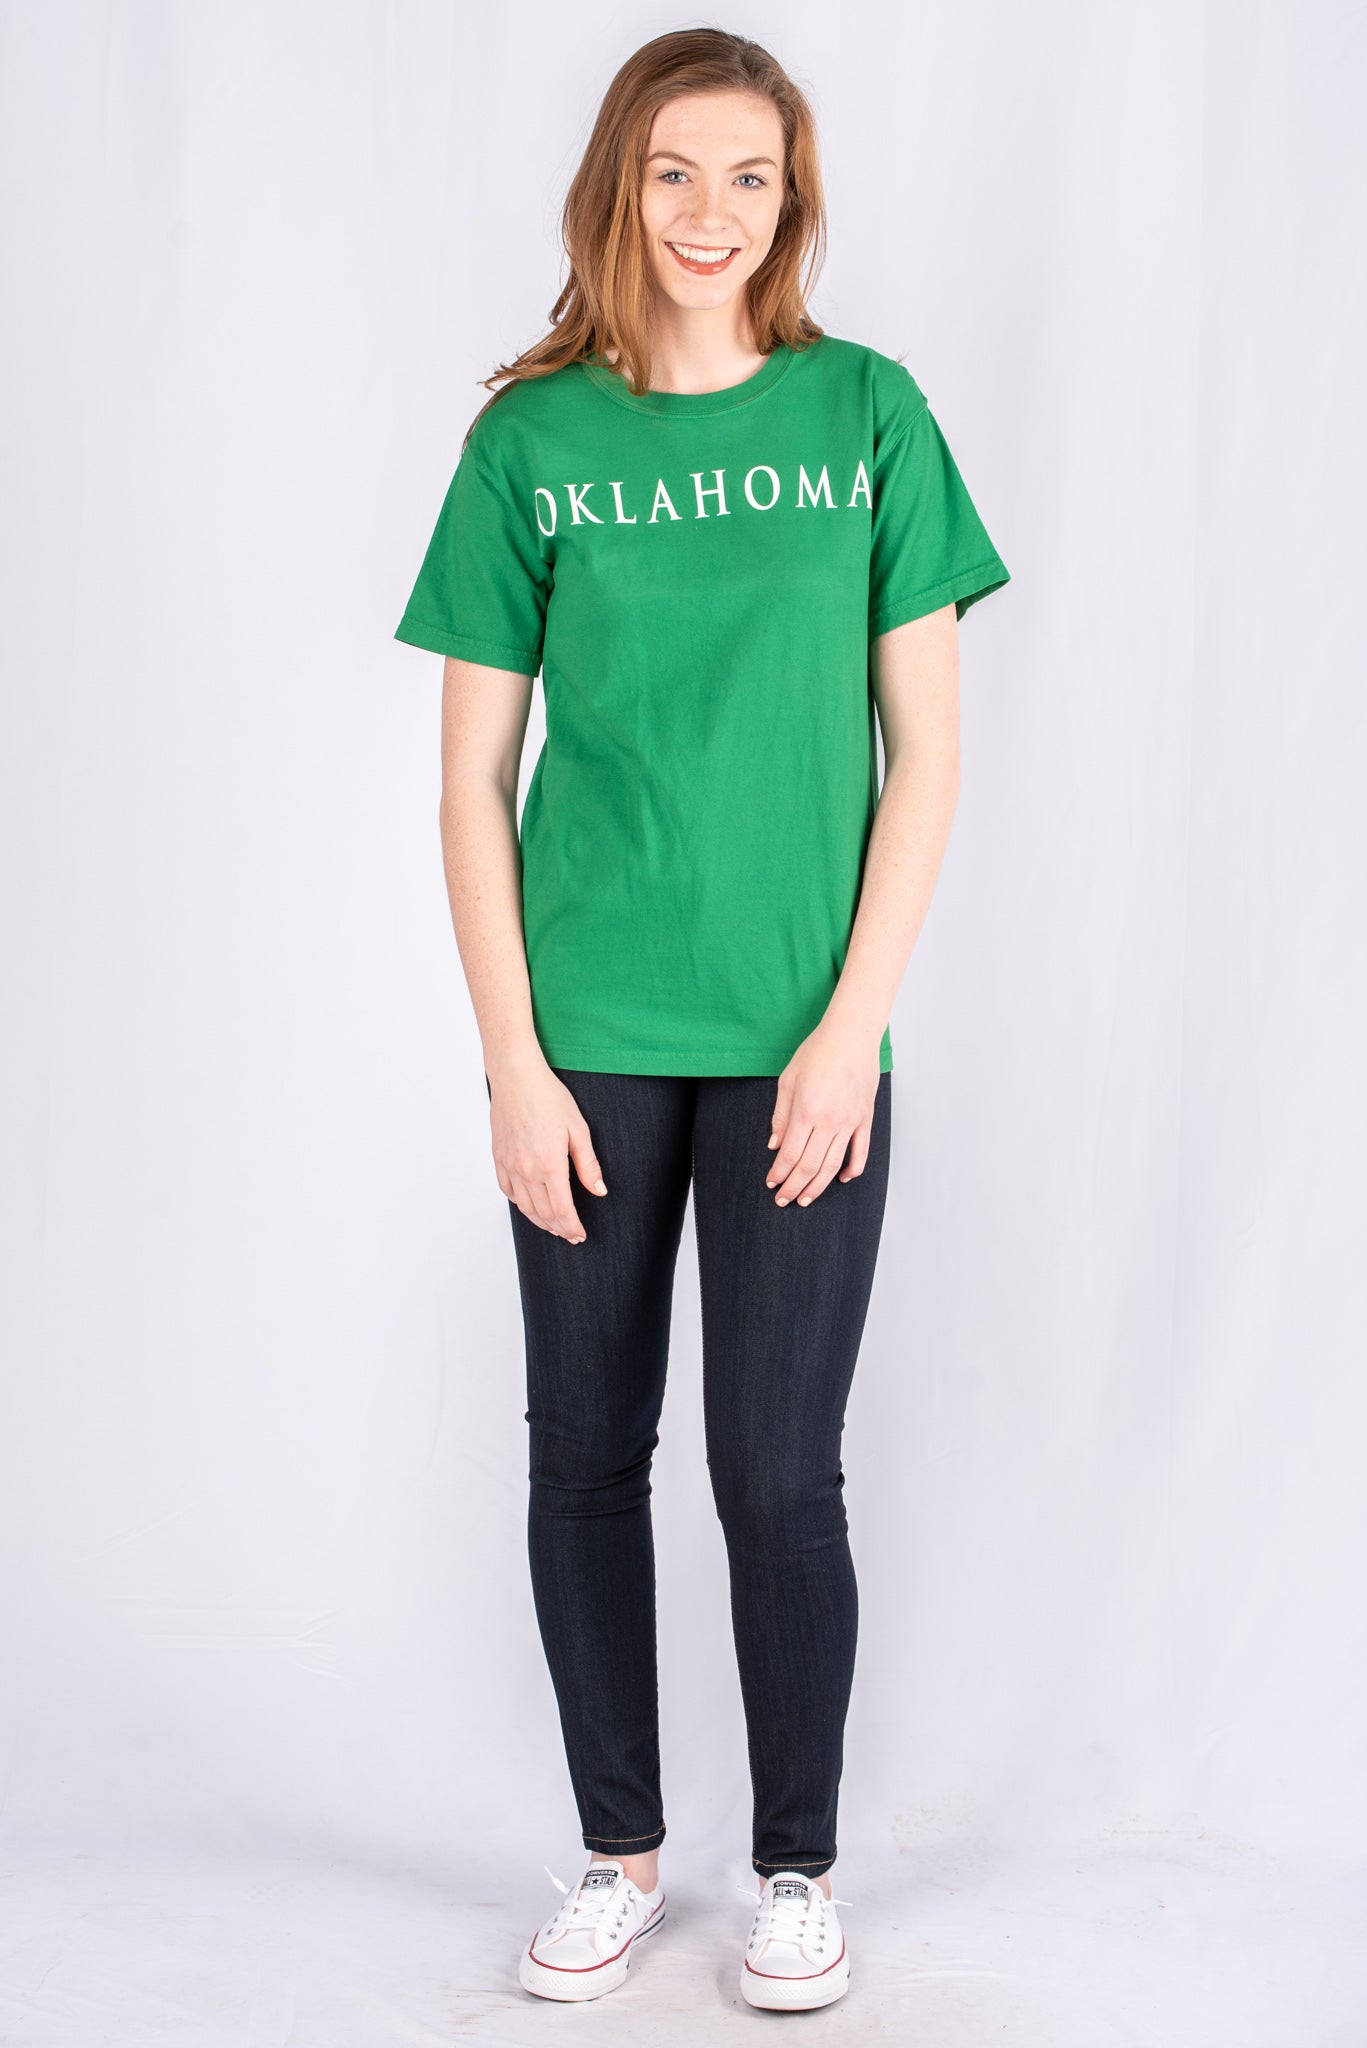 Oklahoma Simply Clover Comfort Color Green T-shirt - Trendy T-shirts - Fashion Graphic T-Shirts at Lush Fashion Lounge Boutique in Oklahoma City